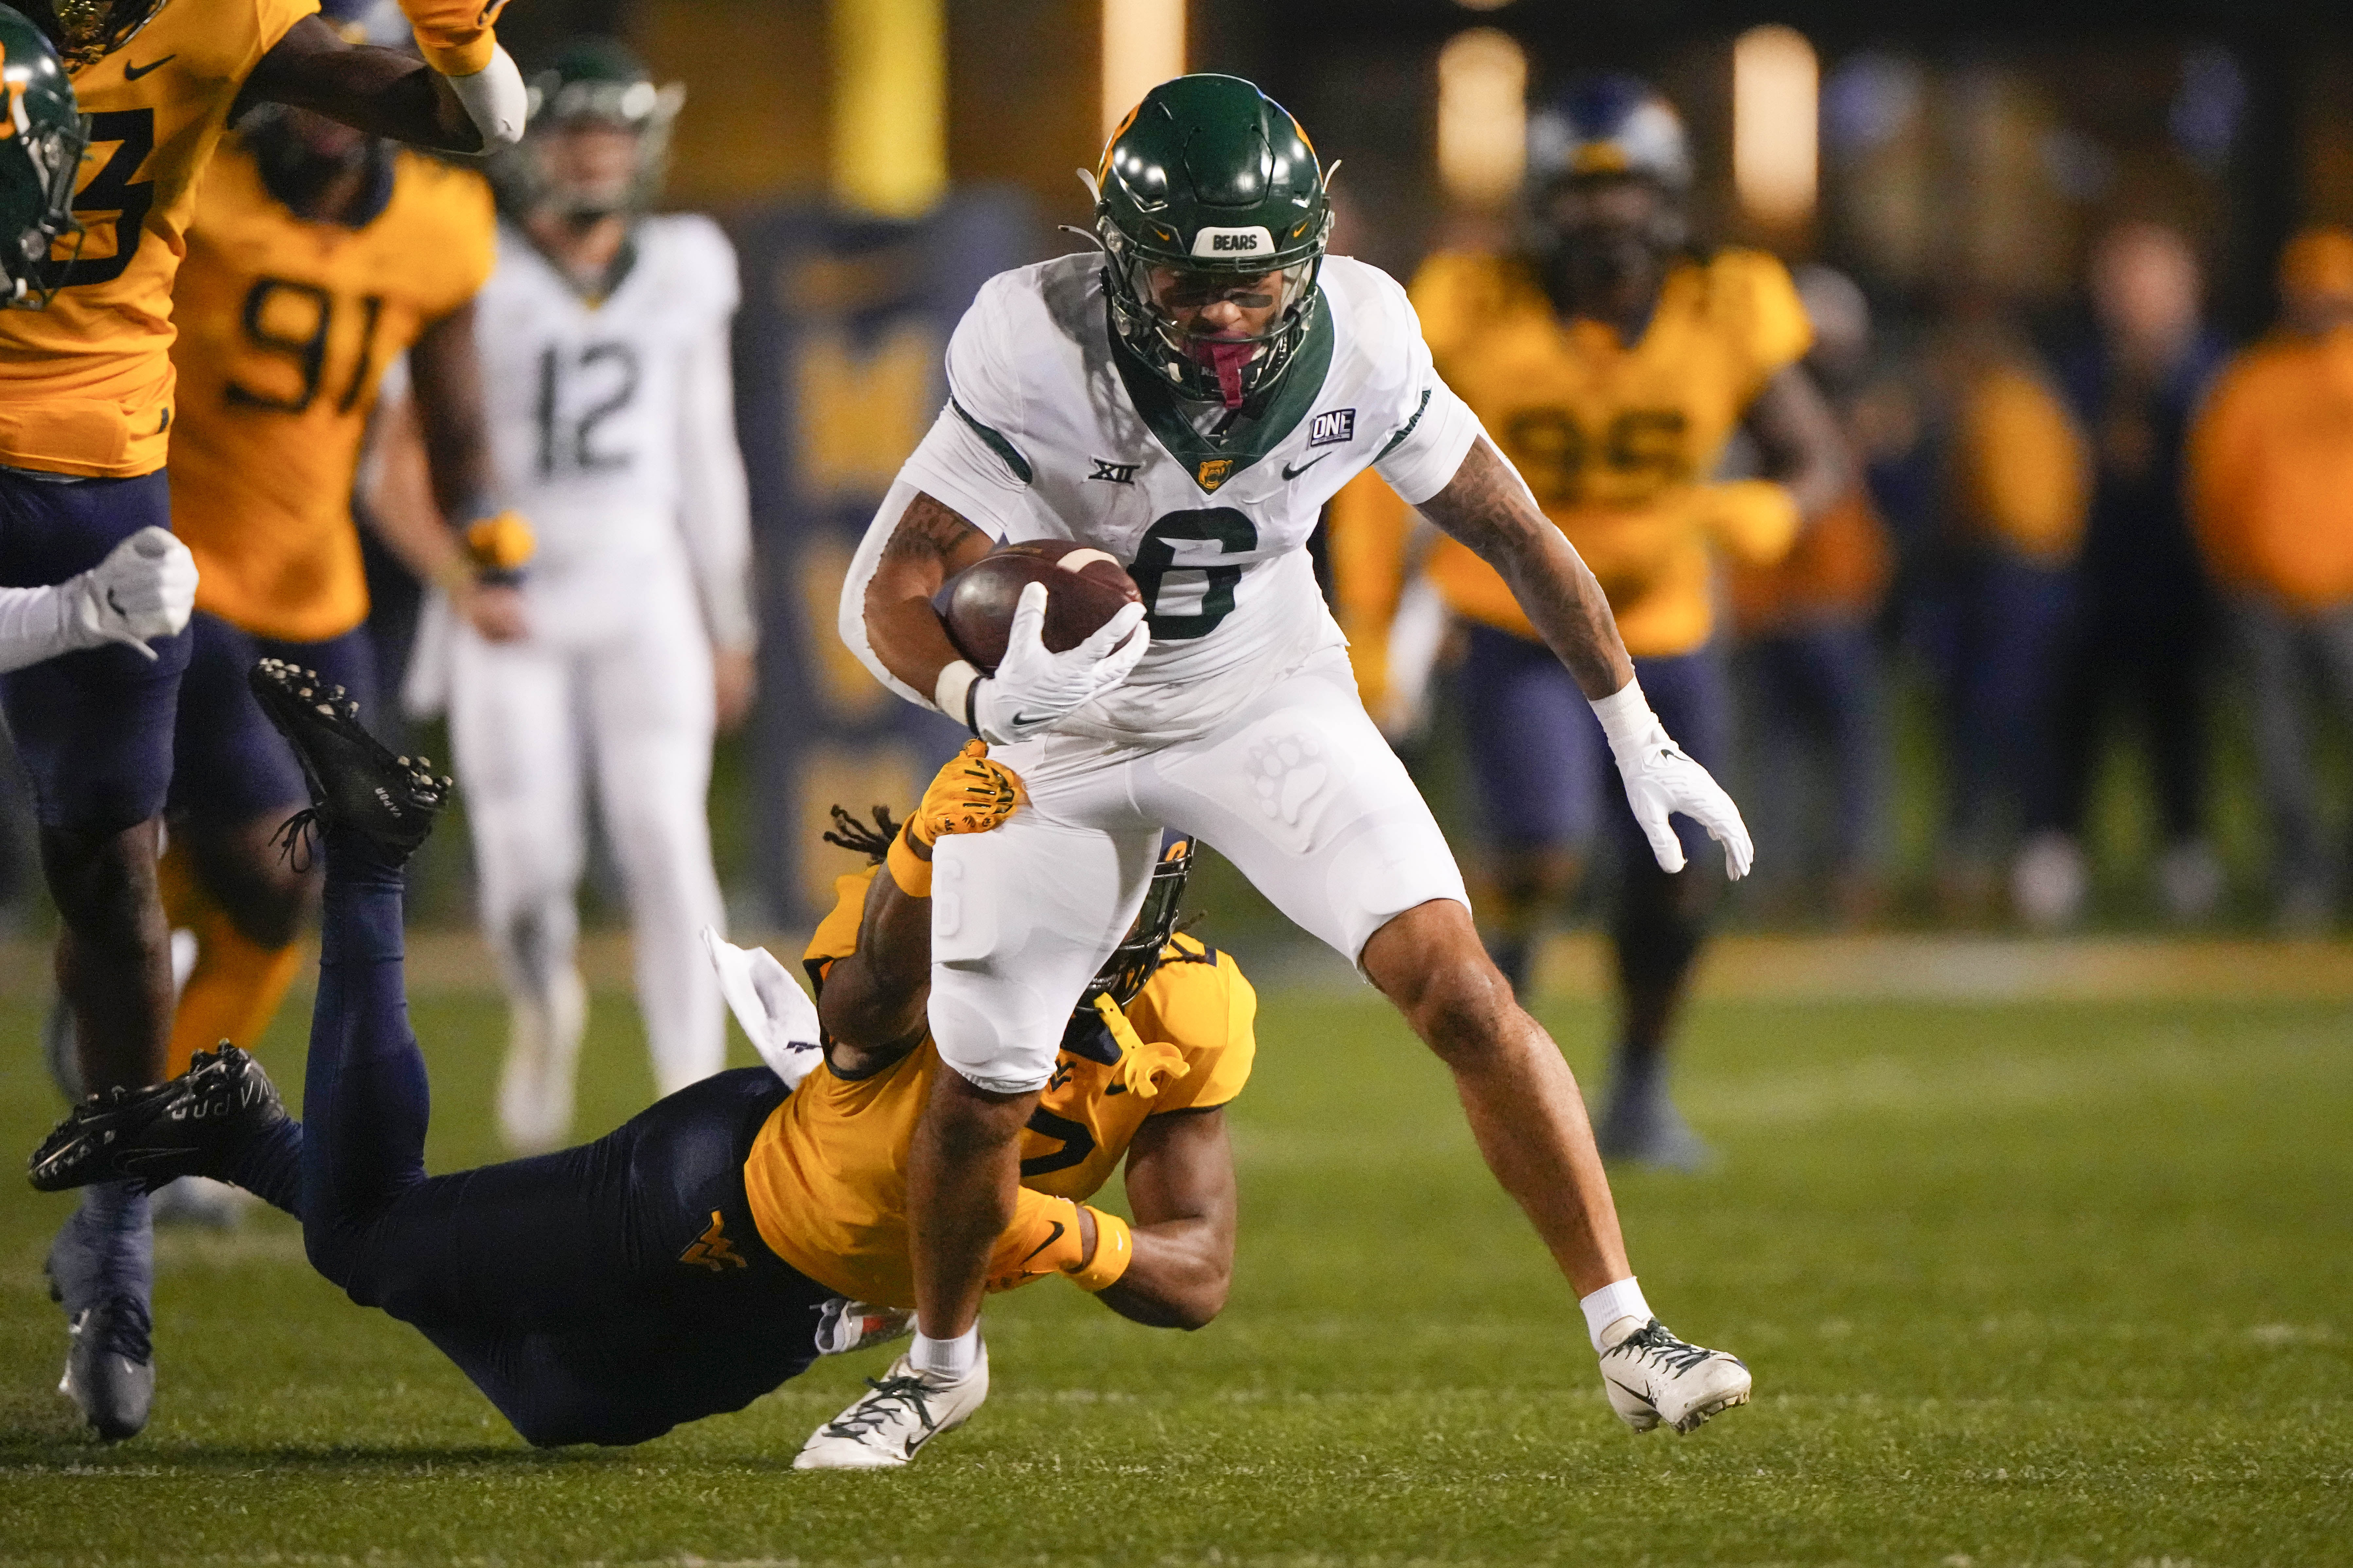 COLLEGE FOOTBALL: OCT 13 Baylor at West Virginia